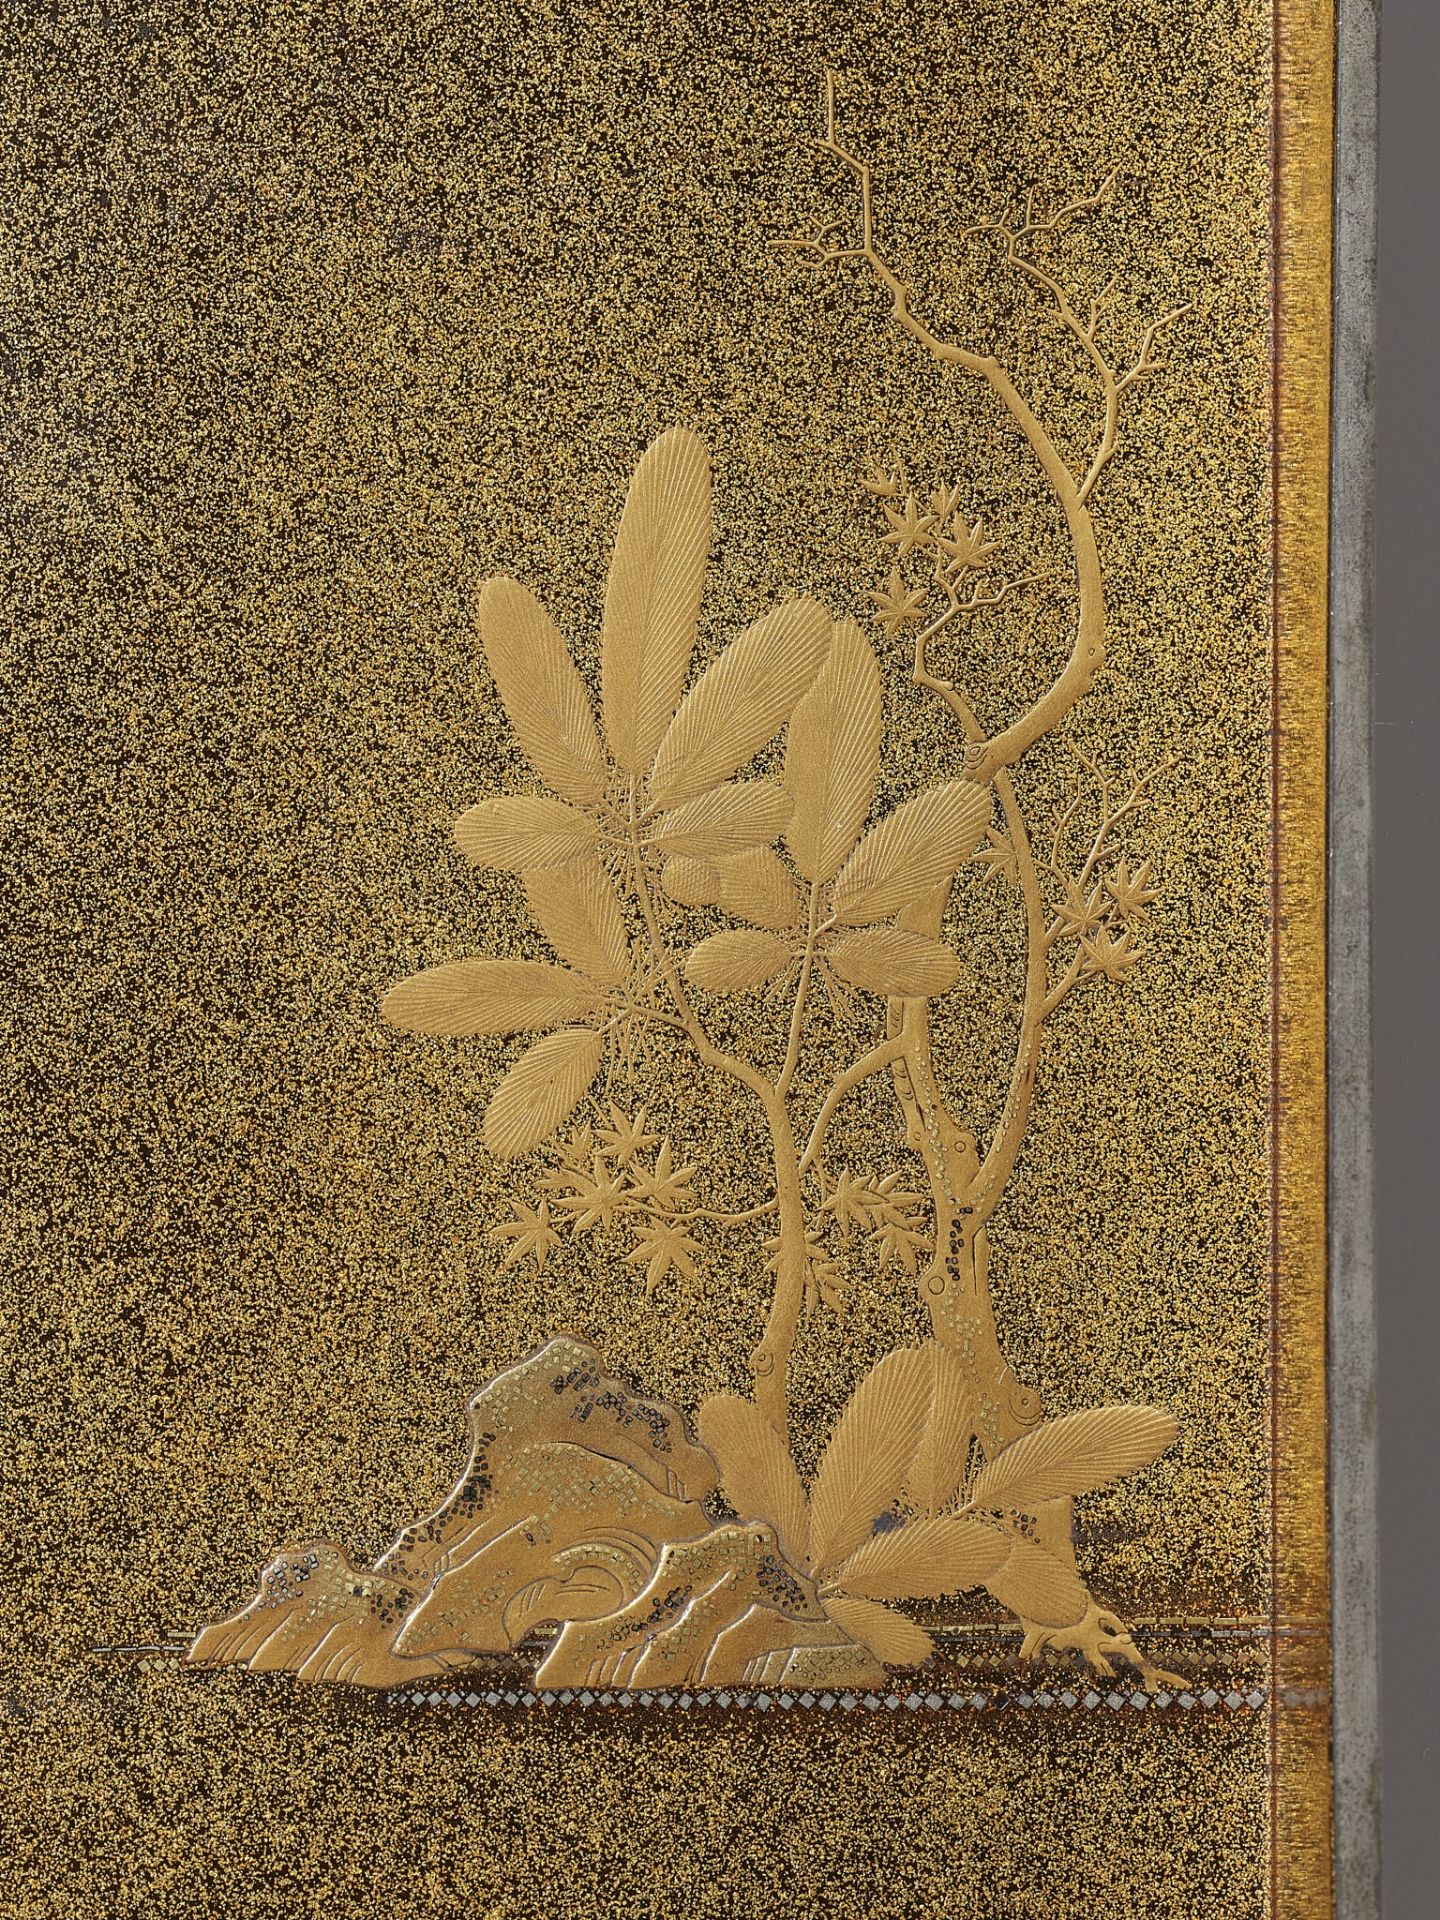 A SUPERB LACQUER SUZURIBAKO (WRITING BOX) DEPICTING A MOONLIT FOREST - Image 9 of 15